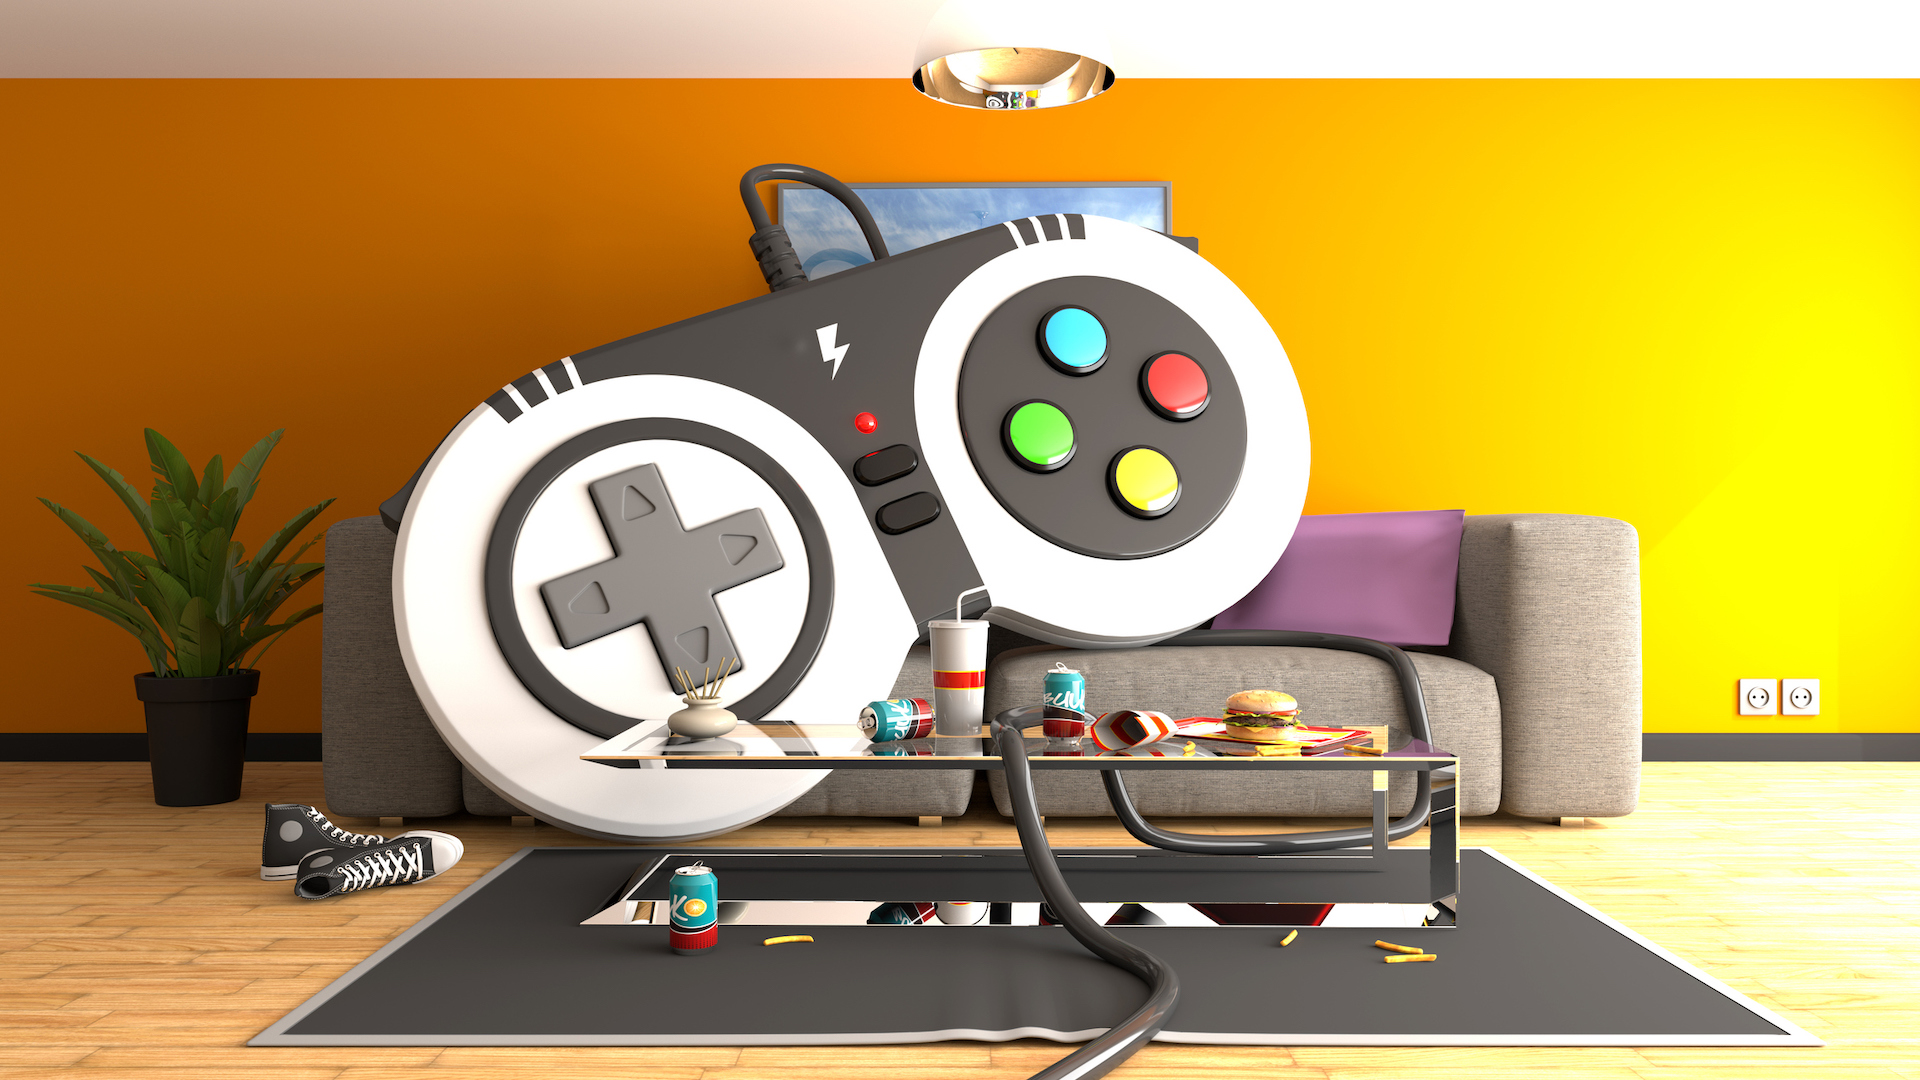 A massive game controller takes over a living room